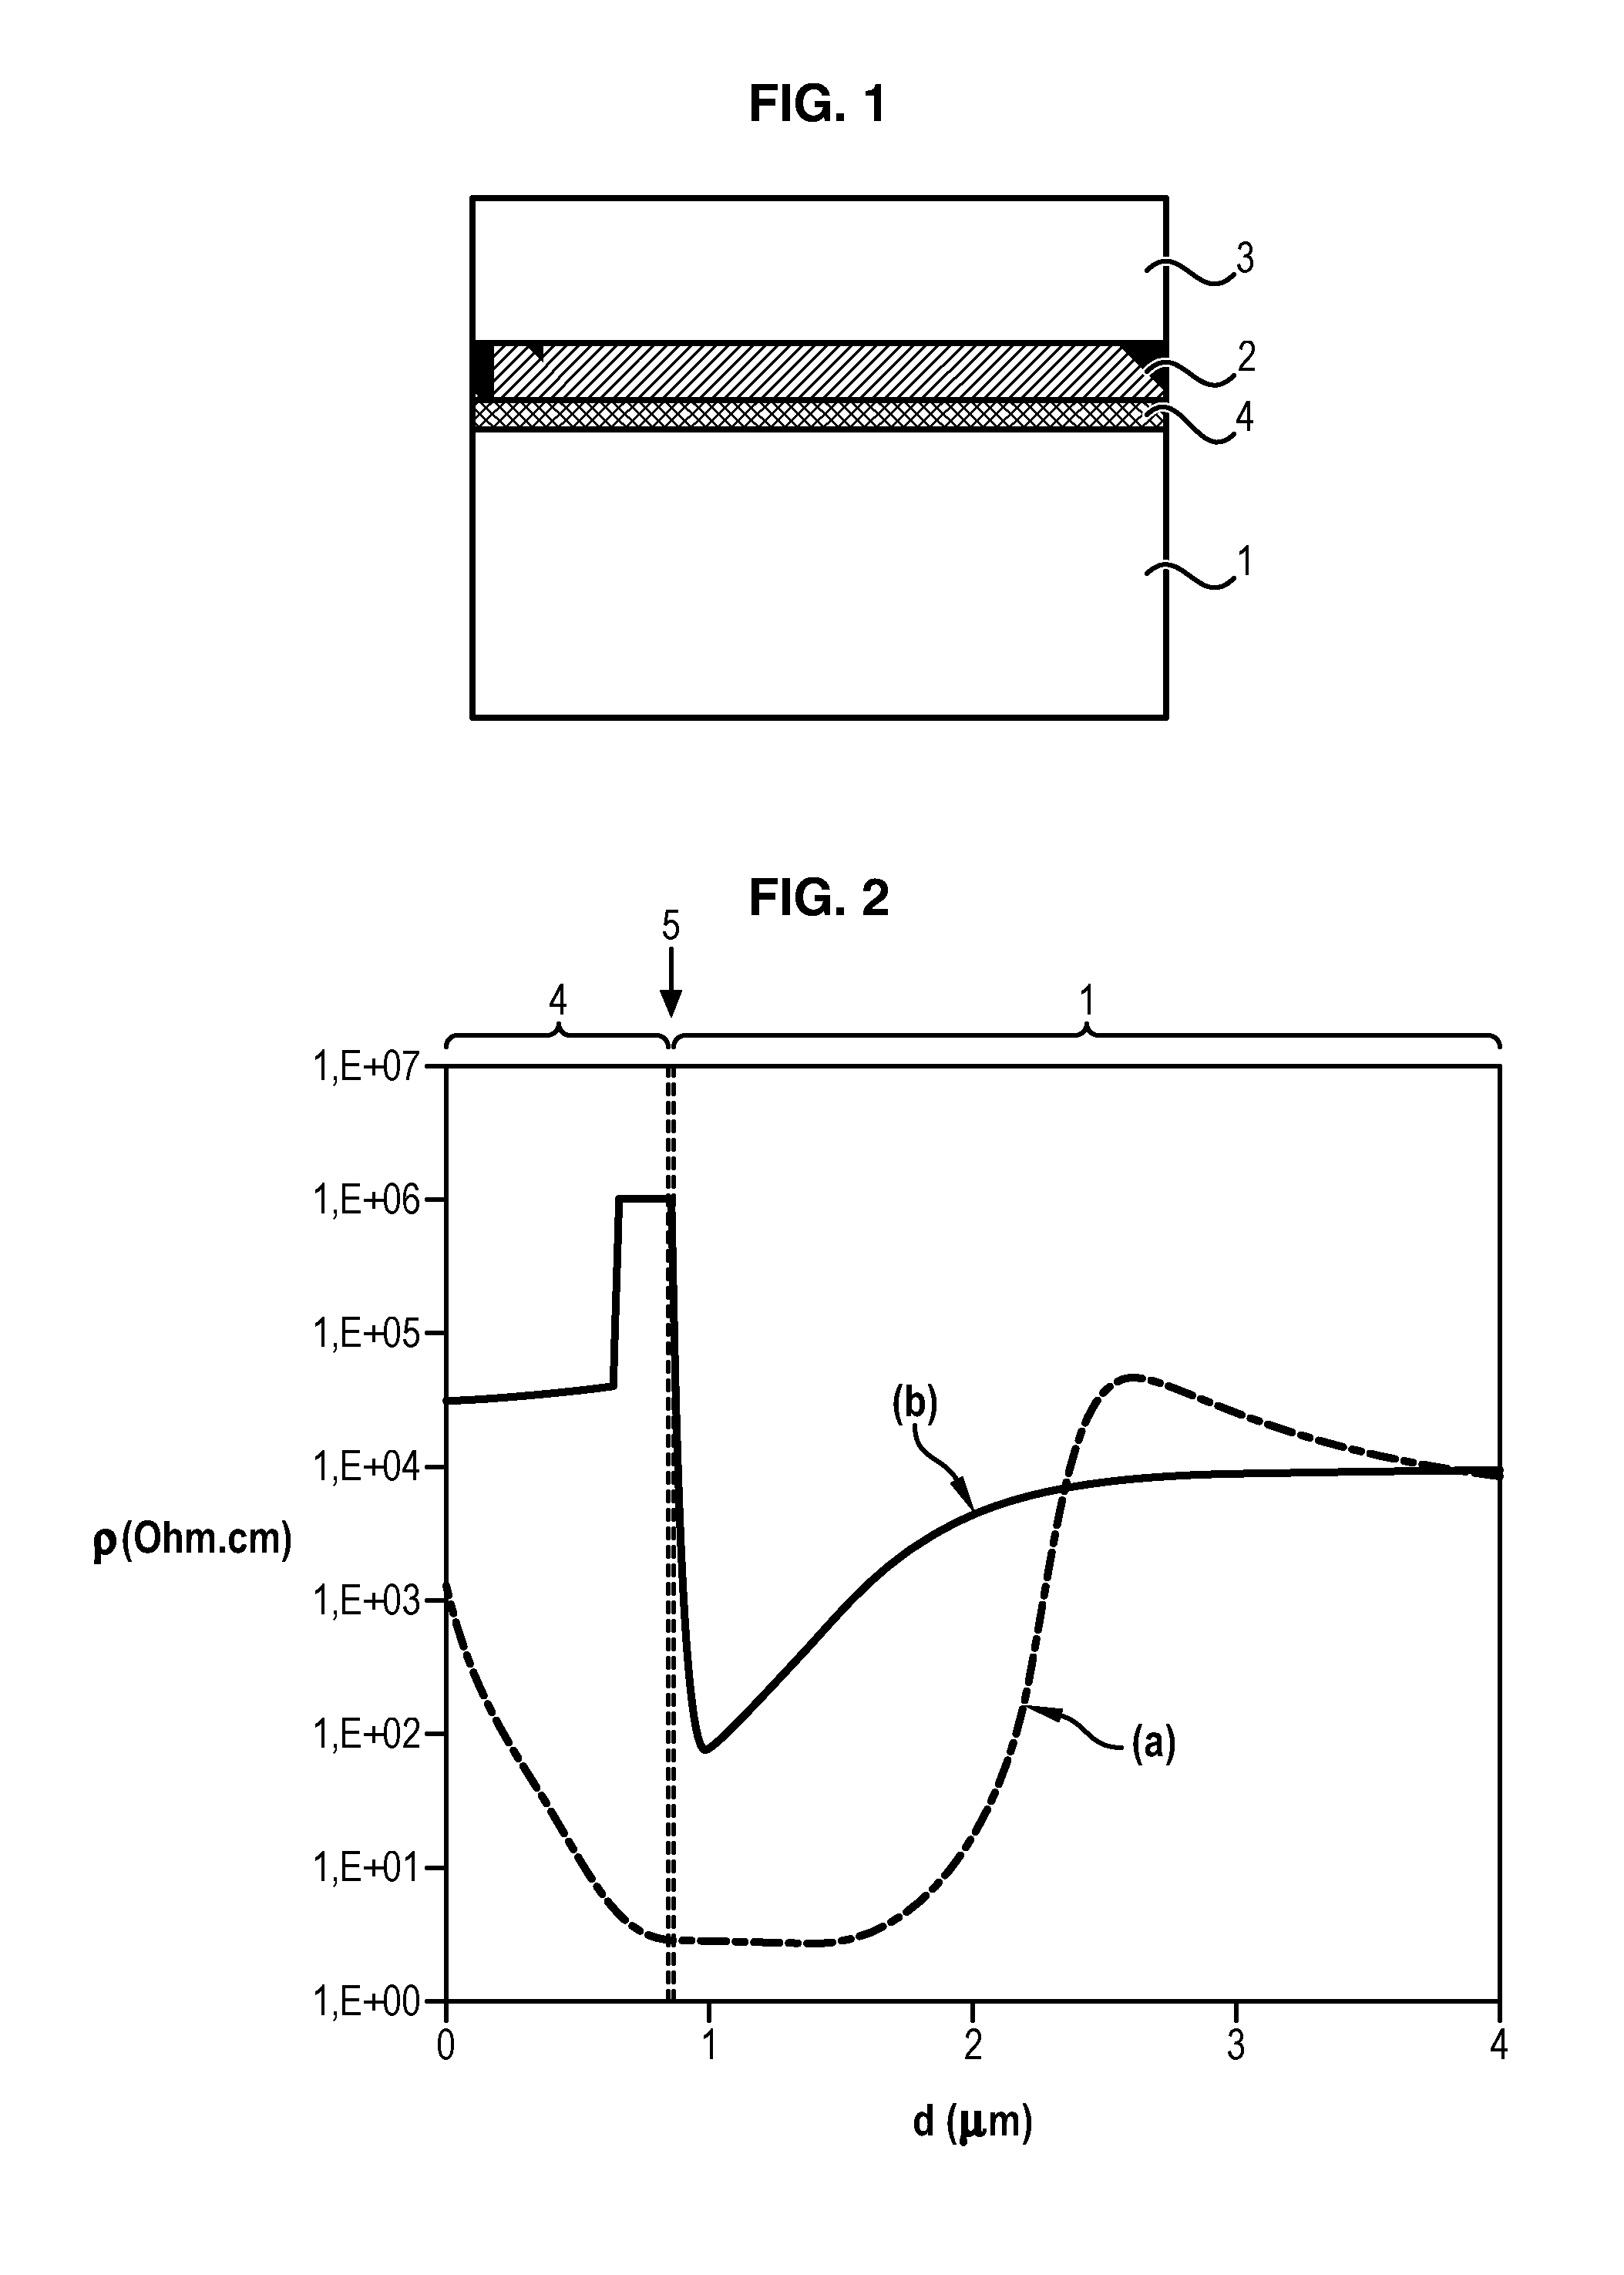 Manufacturing method for a semiconductor on insulator type substrate for radiofrequency applications